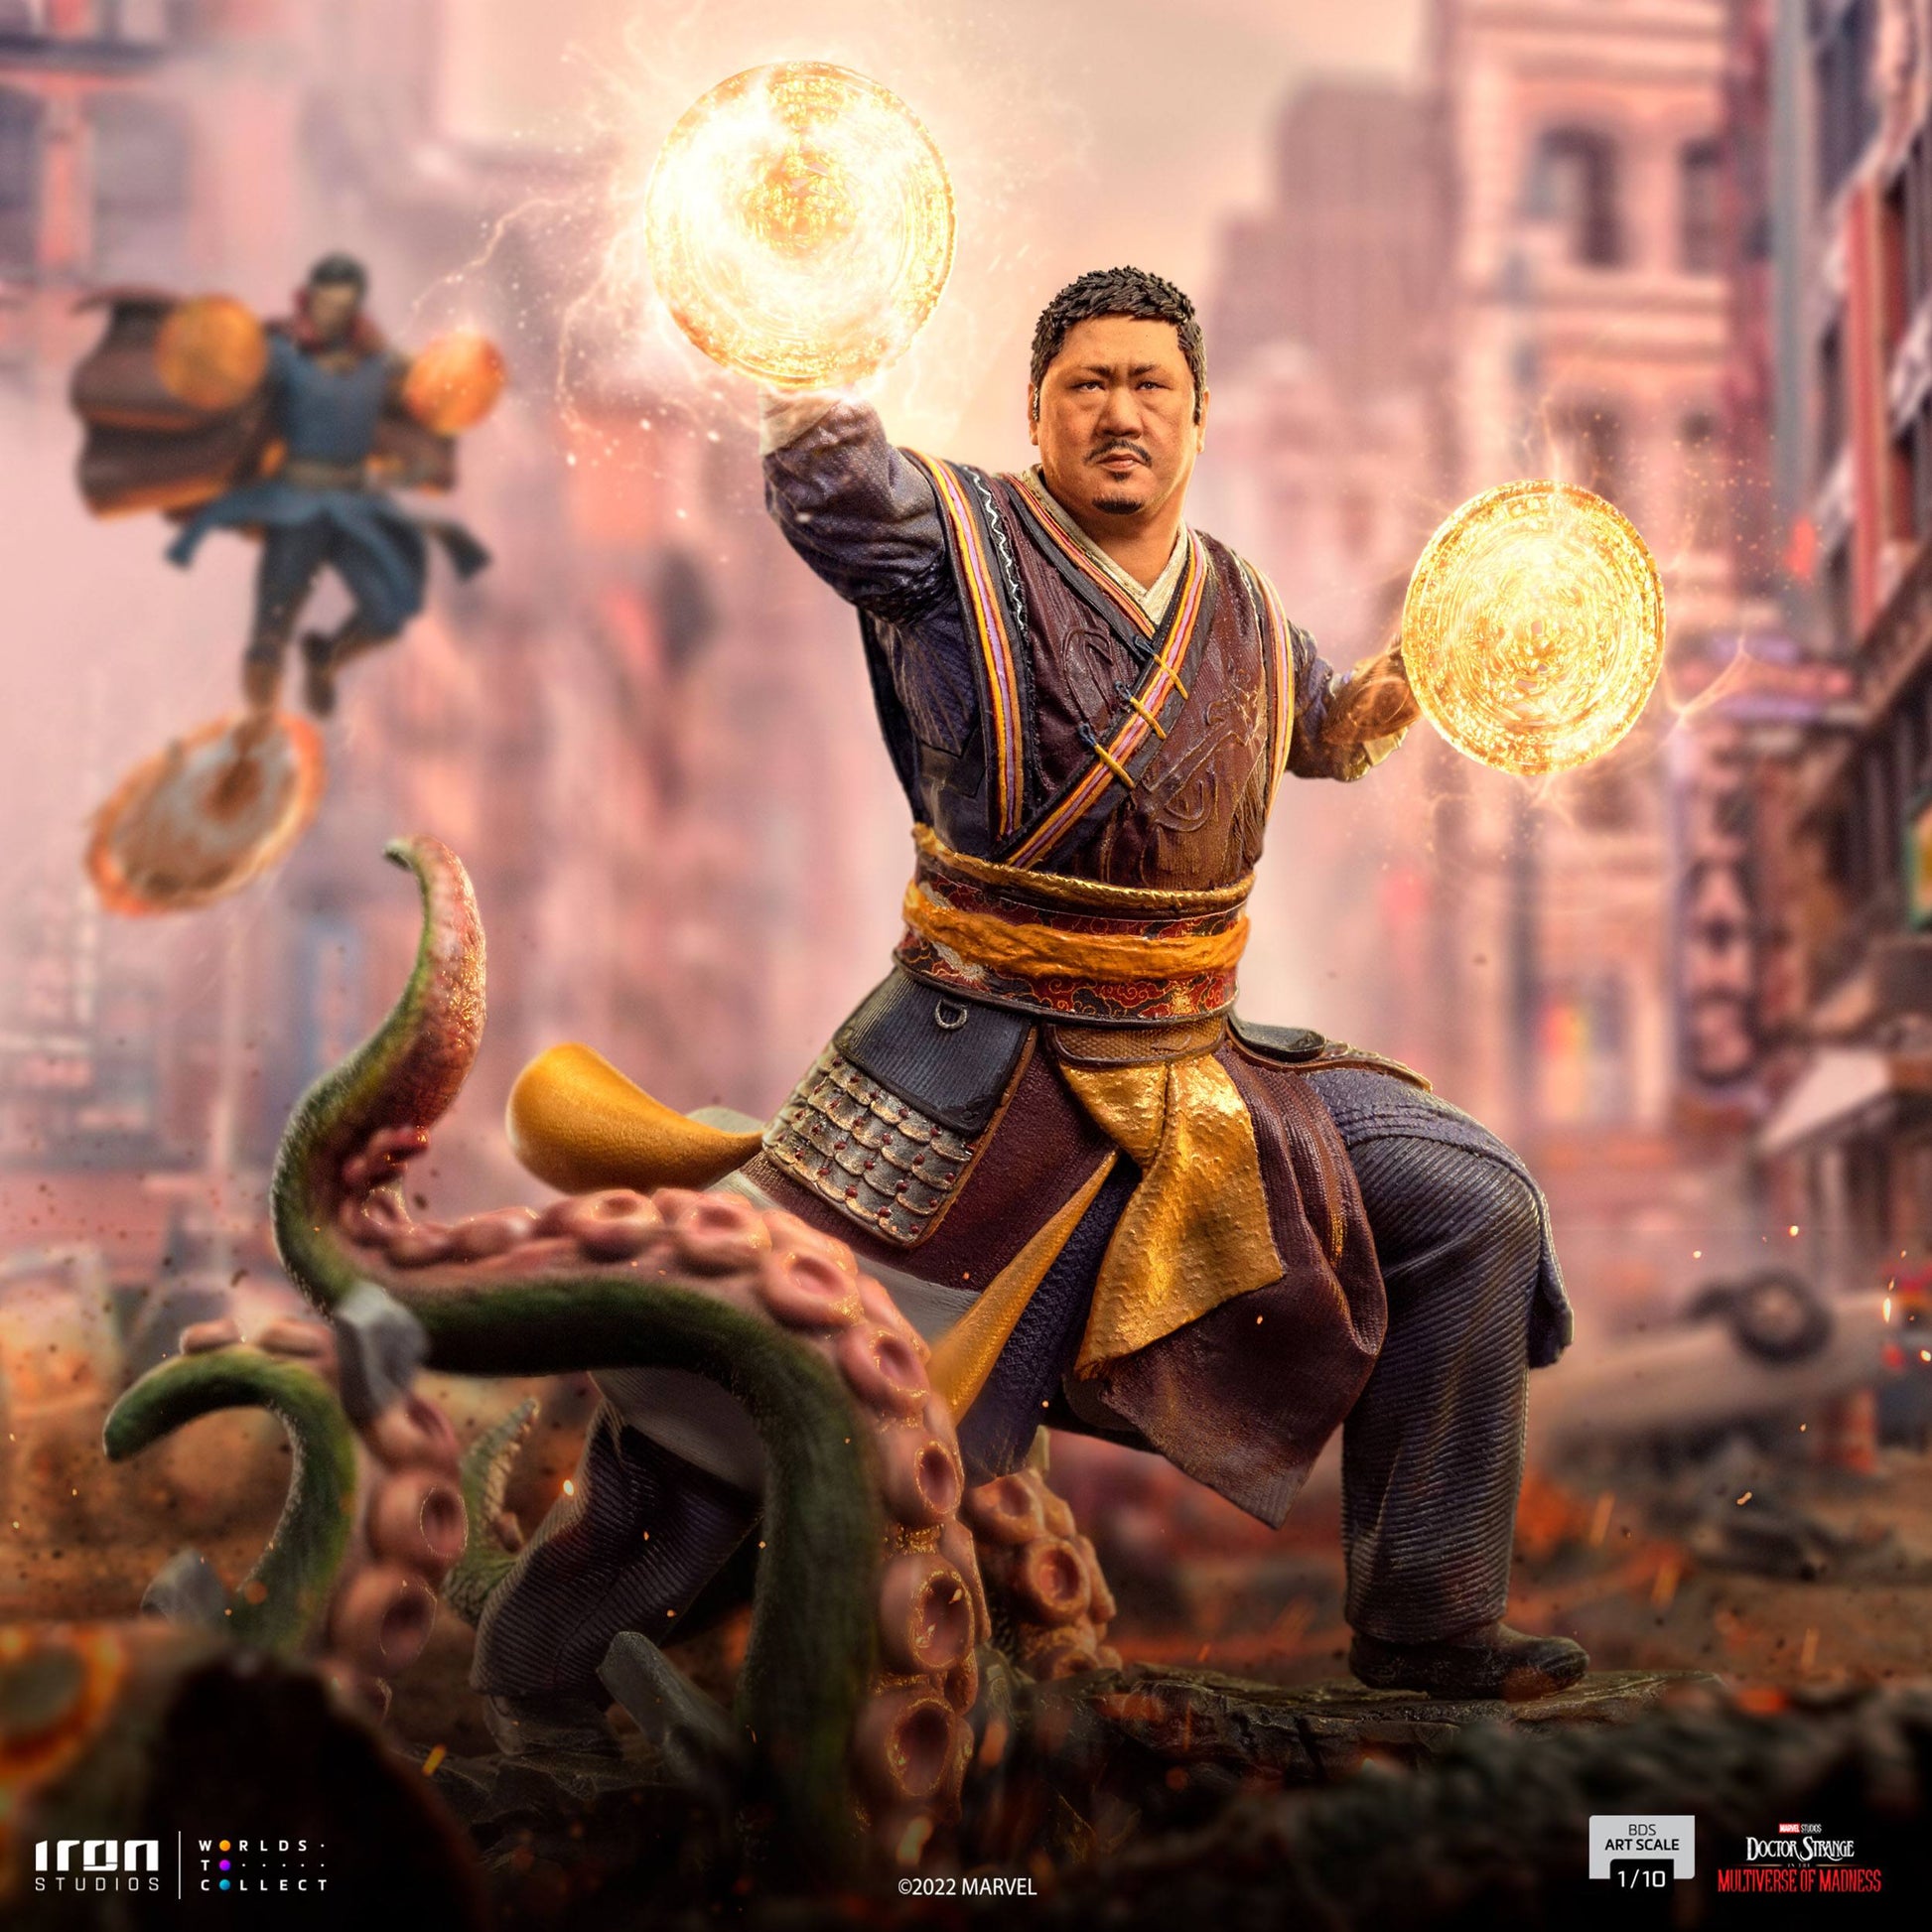 wong-doctor-strange-in-the-multiverse-of-madness-iron-studios